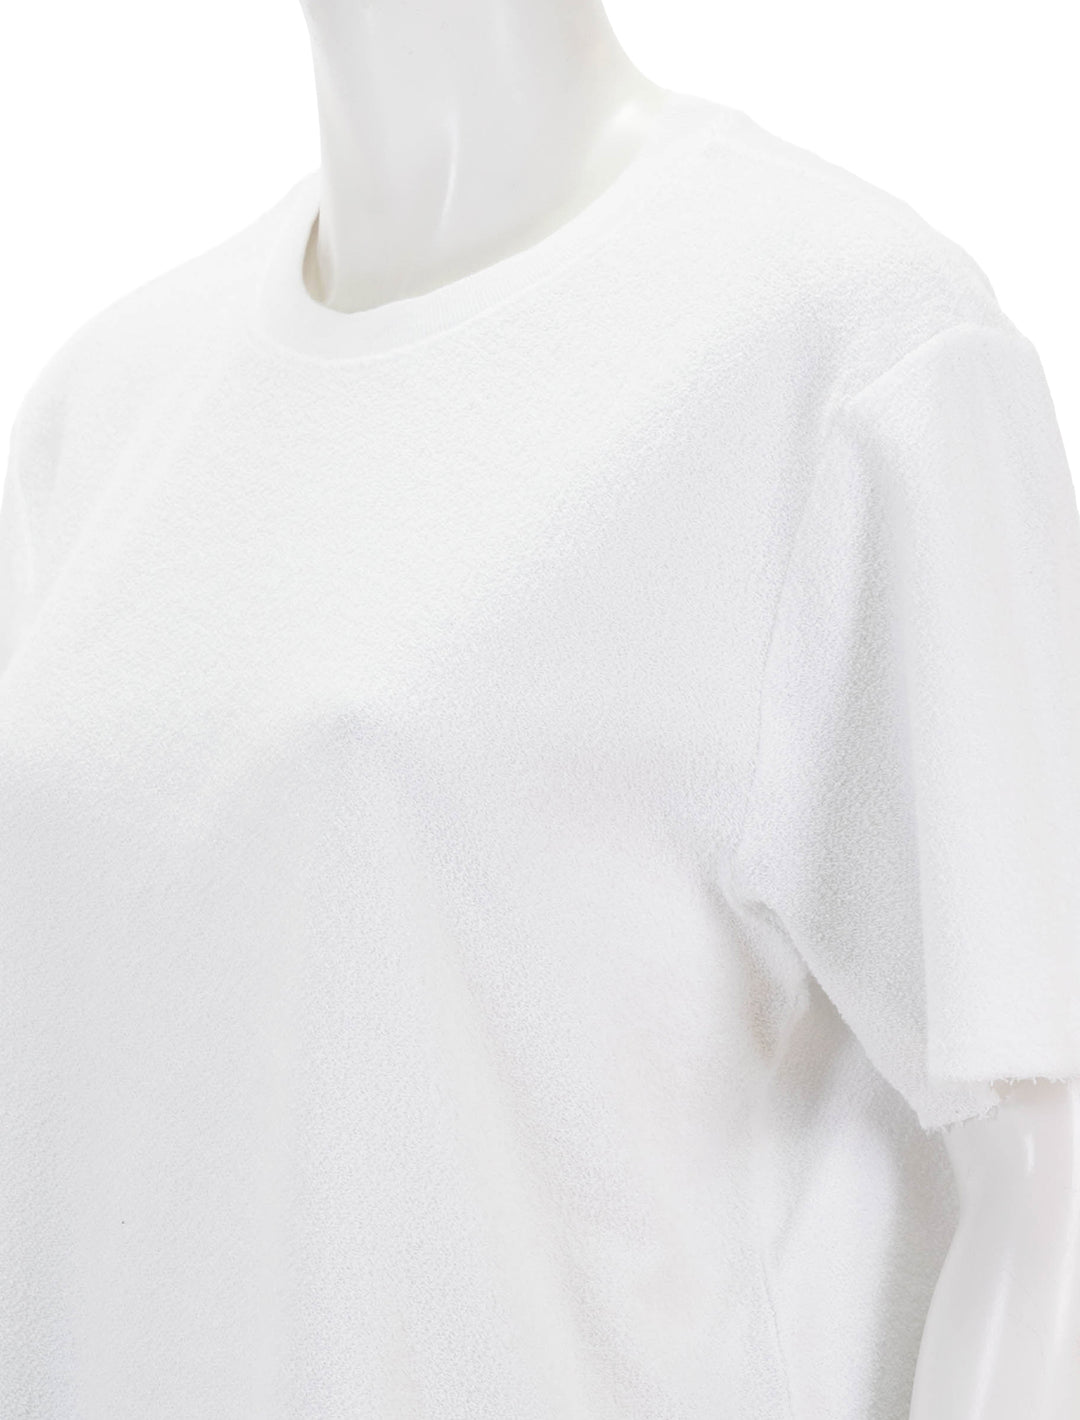 Close-up view of Perfectwhitetee's demi french terry t-shirt in white.